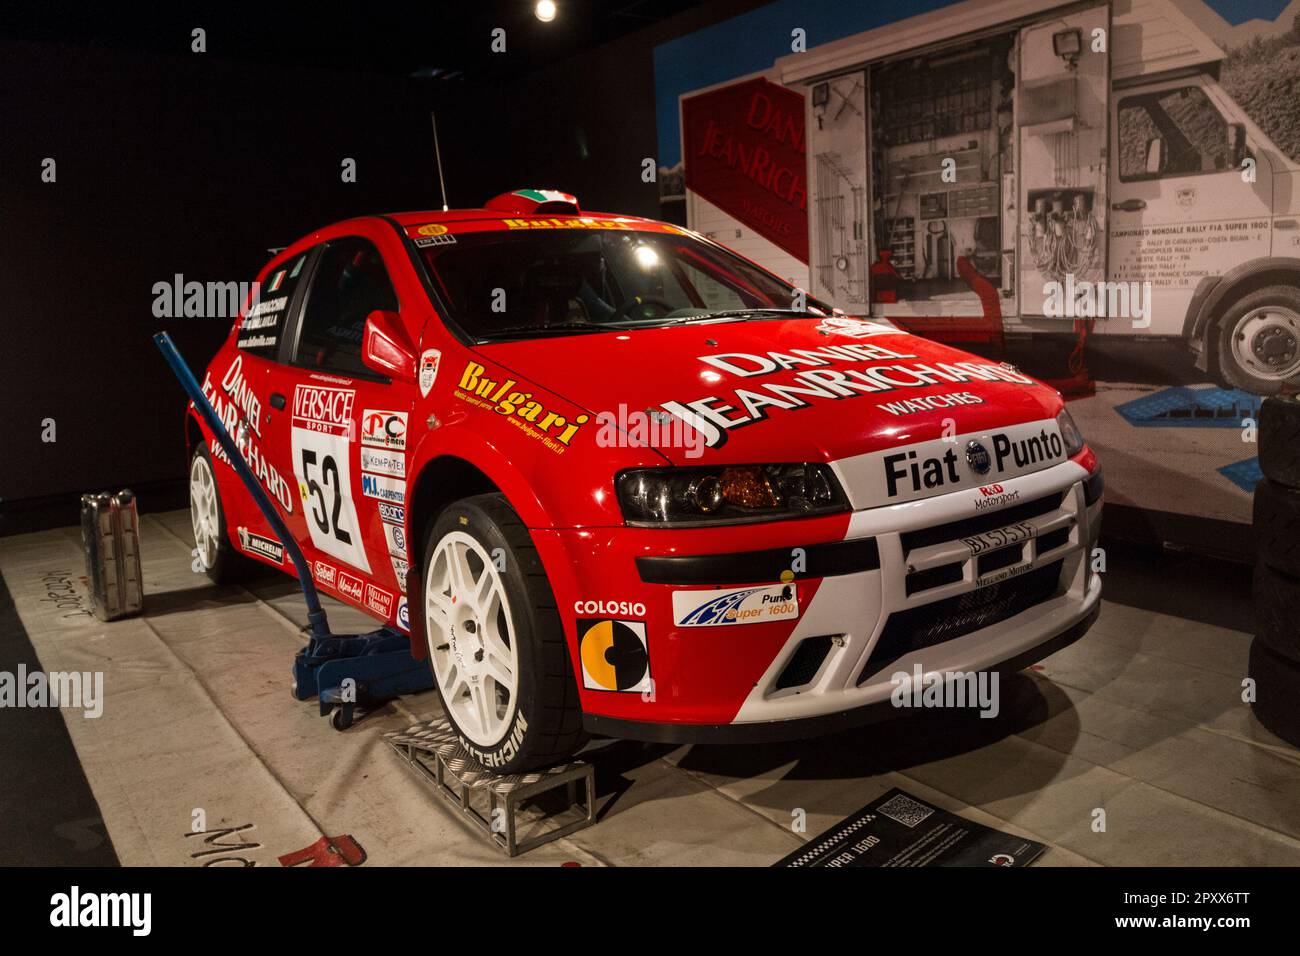 Fiat Punto S1600 (2001). Exhibition of old rally cars 'Golden age of Rally' at MAUTO, Museo dell'Automobile of Turin, Italy. Stock Photo